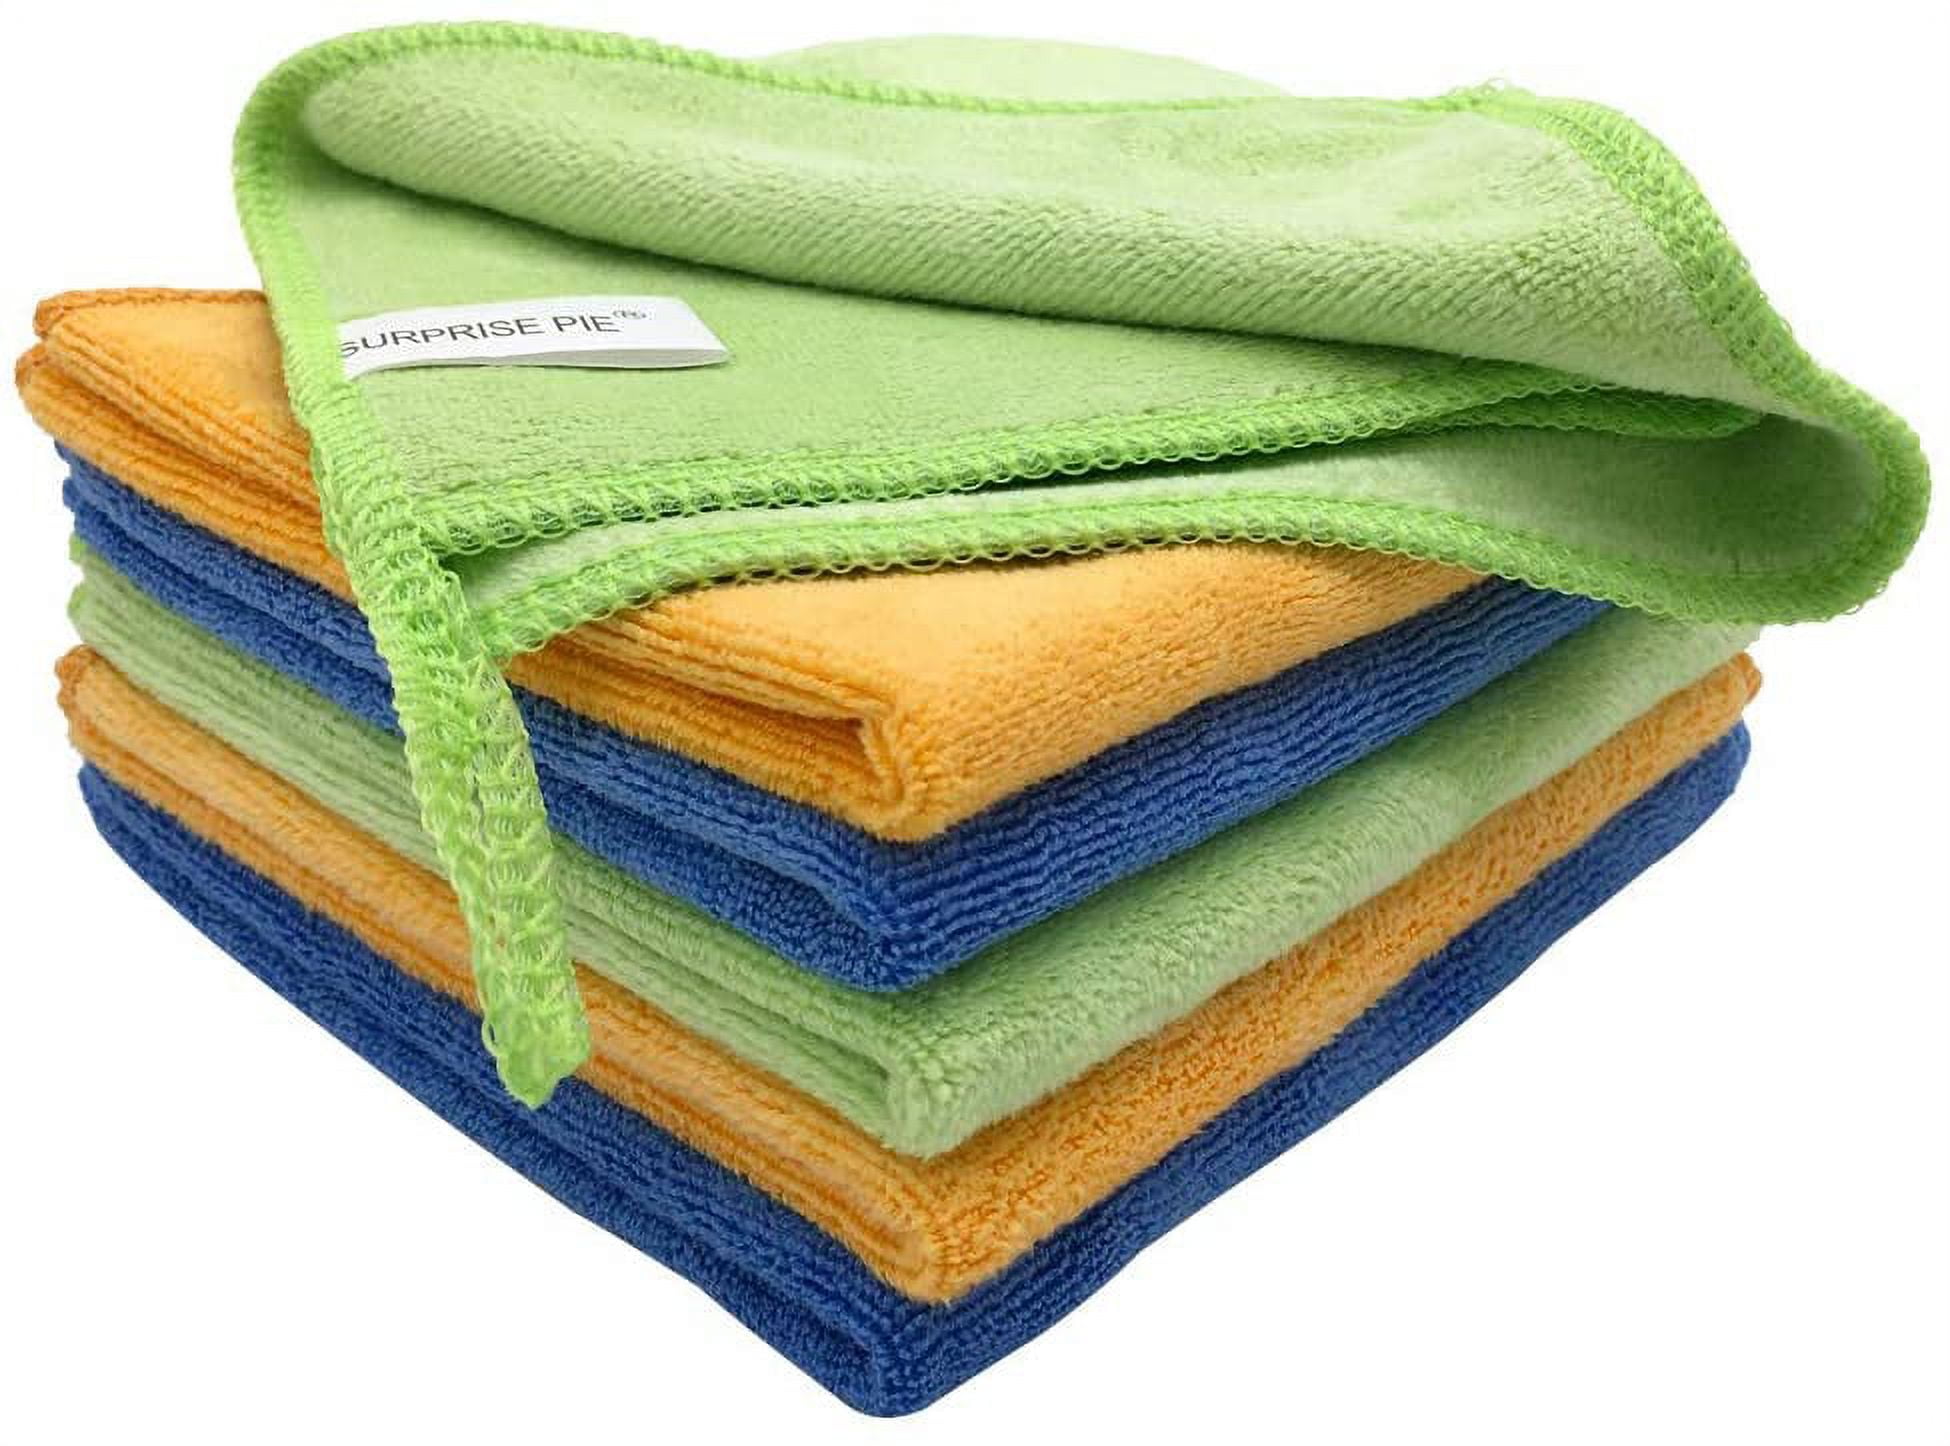 HFGBLG Microfiber Cleaning Cloth Lint Free Cleaning Rags, 10 Pack Fast  Drying Dish Rags for Cleaning, Super Absorbent Kitchen Dish Cloths for Wash